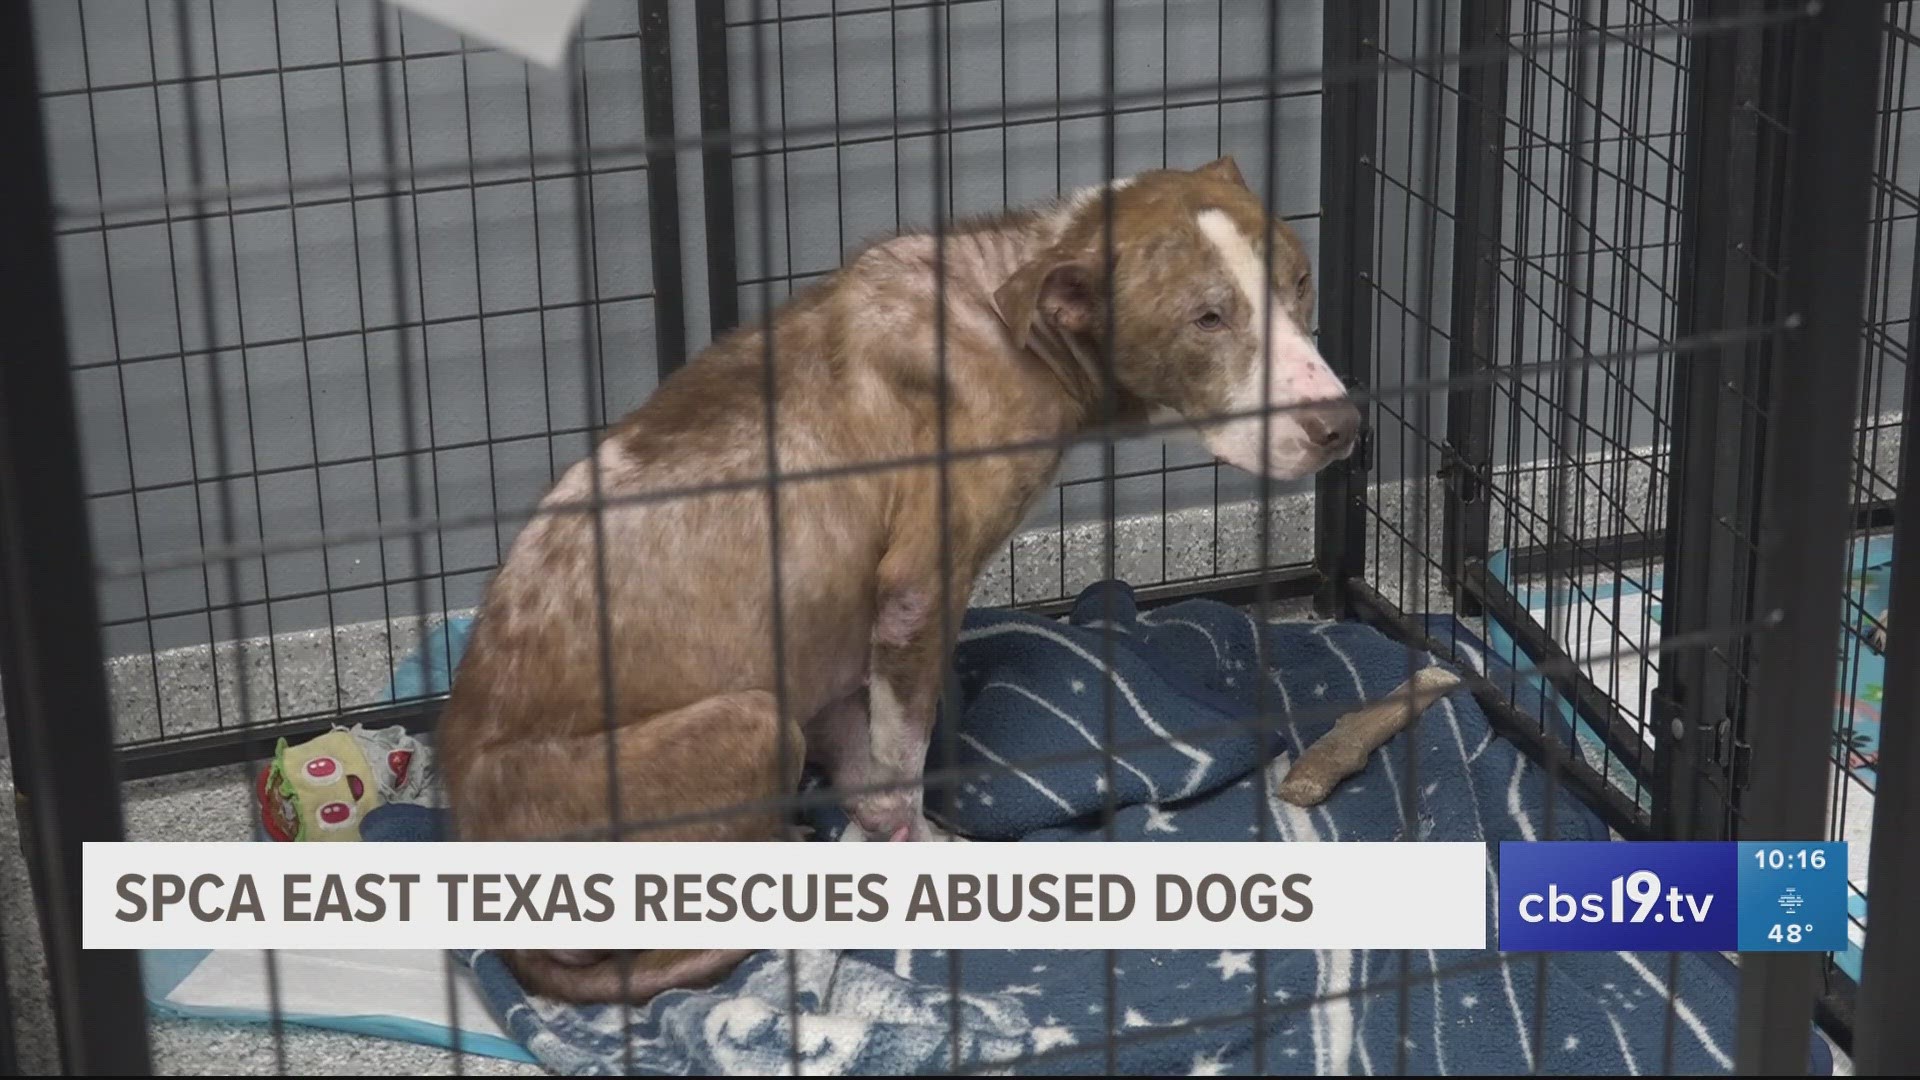 According to SPCA East Texas, the previous owner was arrested and charged with 12 counts of animal cruelty.